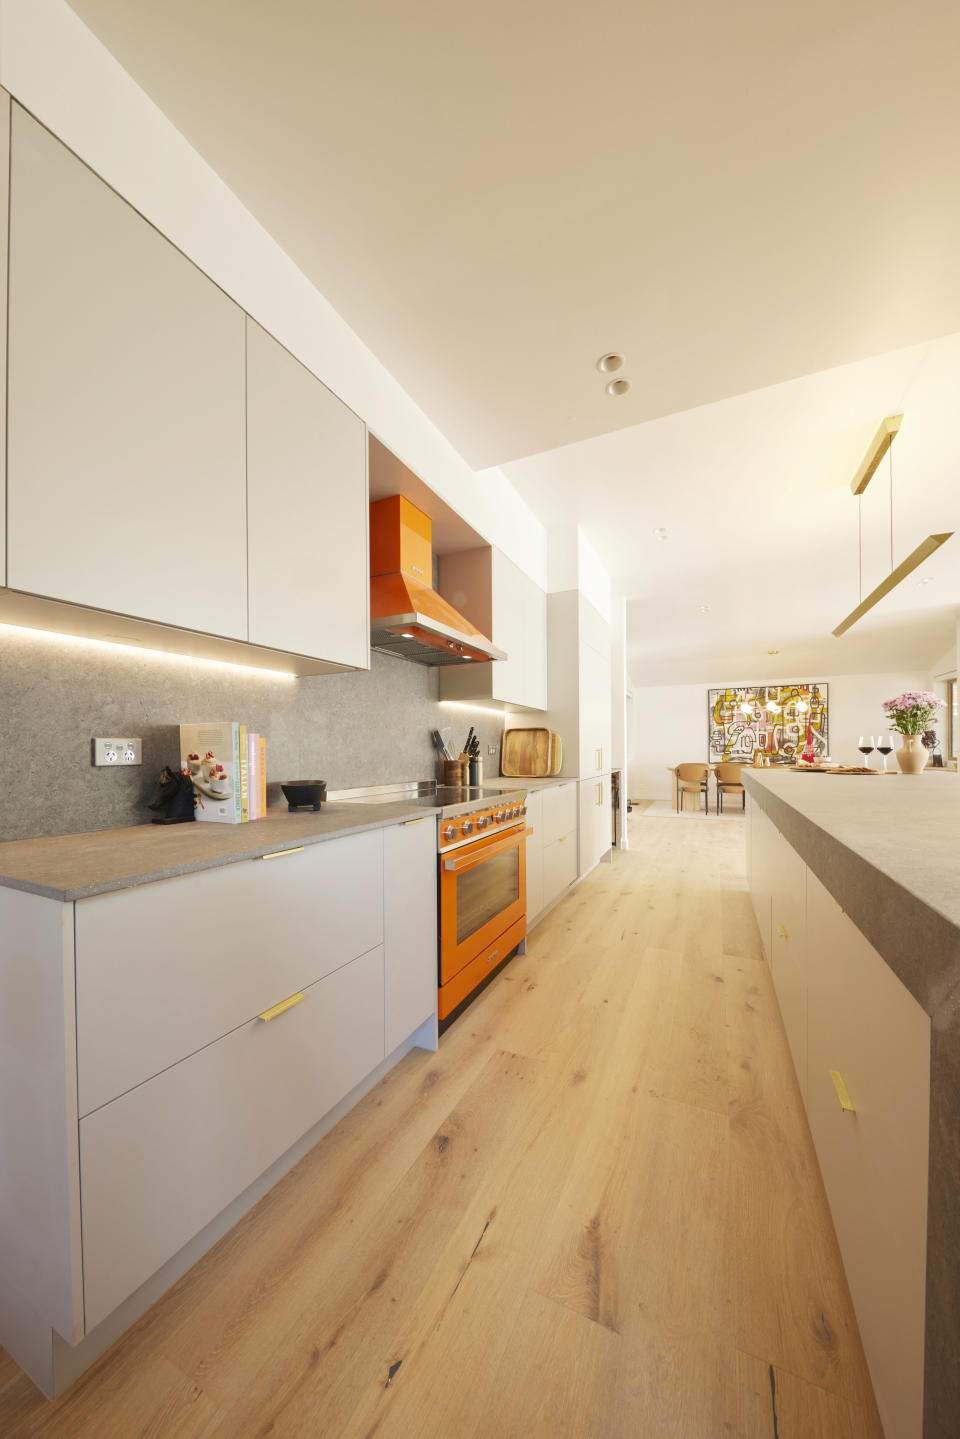 A shot of the kitchen, with the orange stove and range hood on the left and kitchen island on the right. 